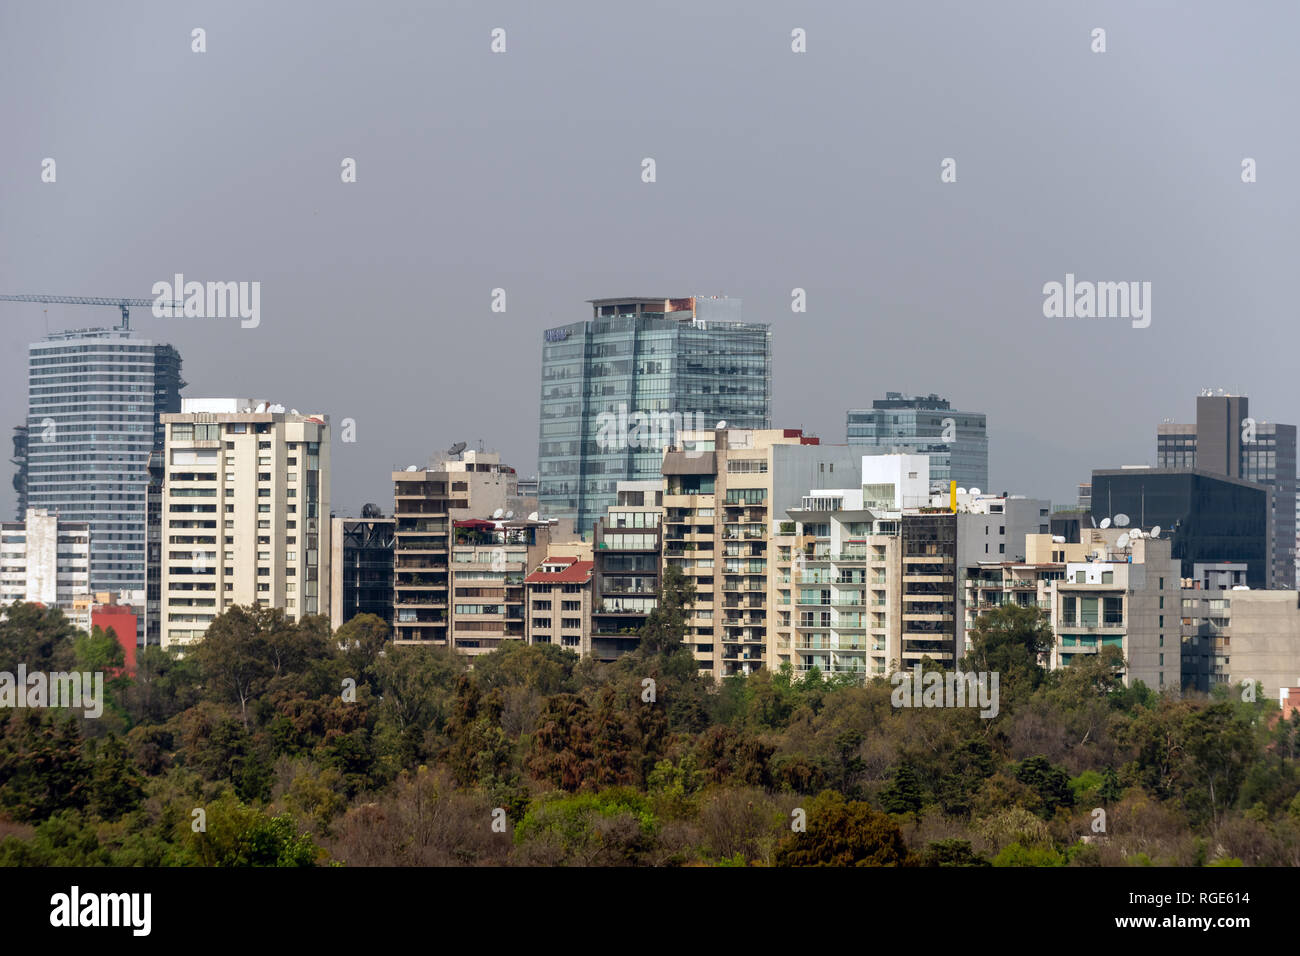 View across the city from Chapultepec Park in Mexico City Stock Photo